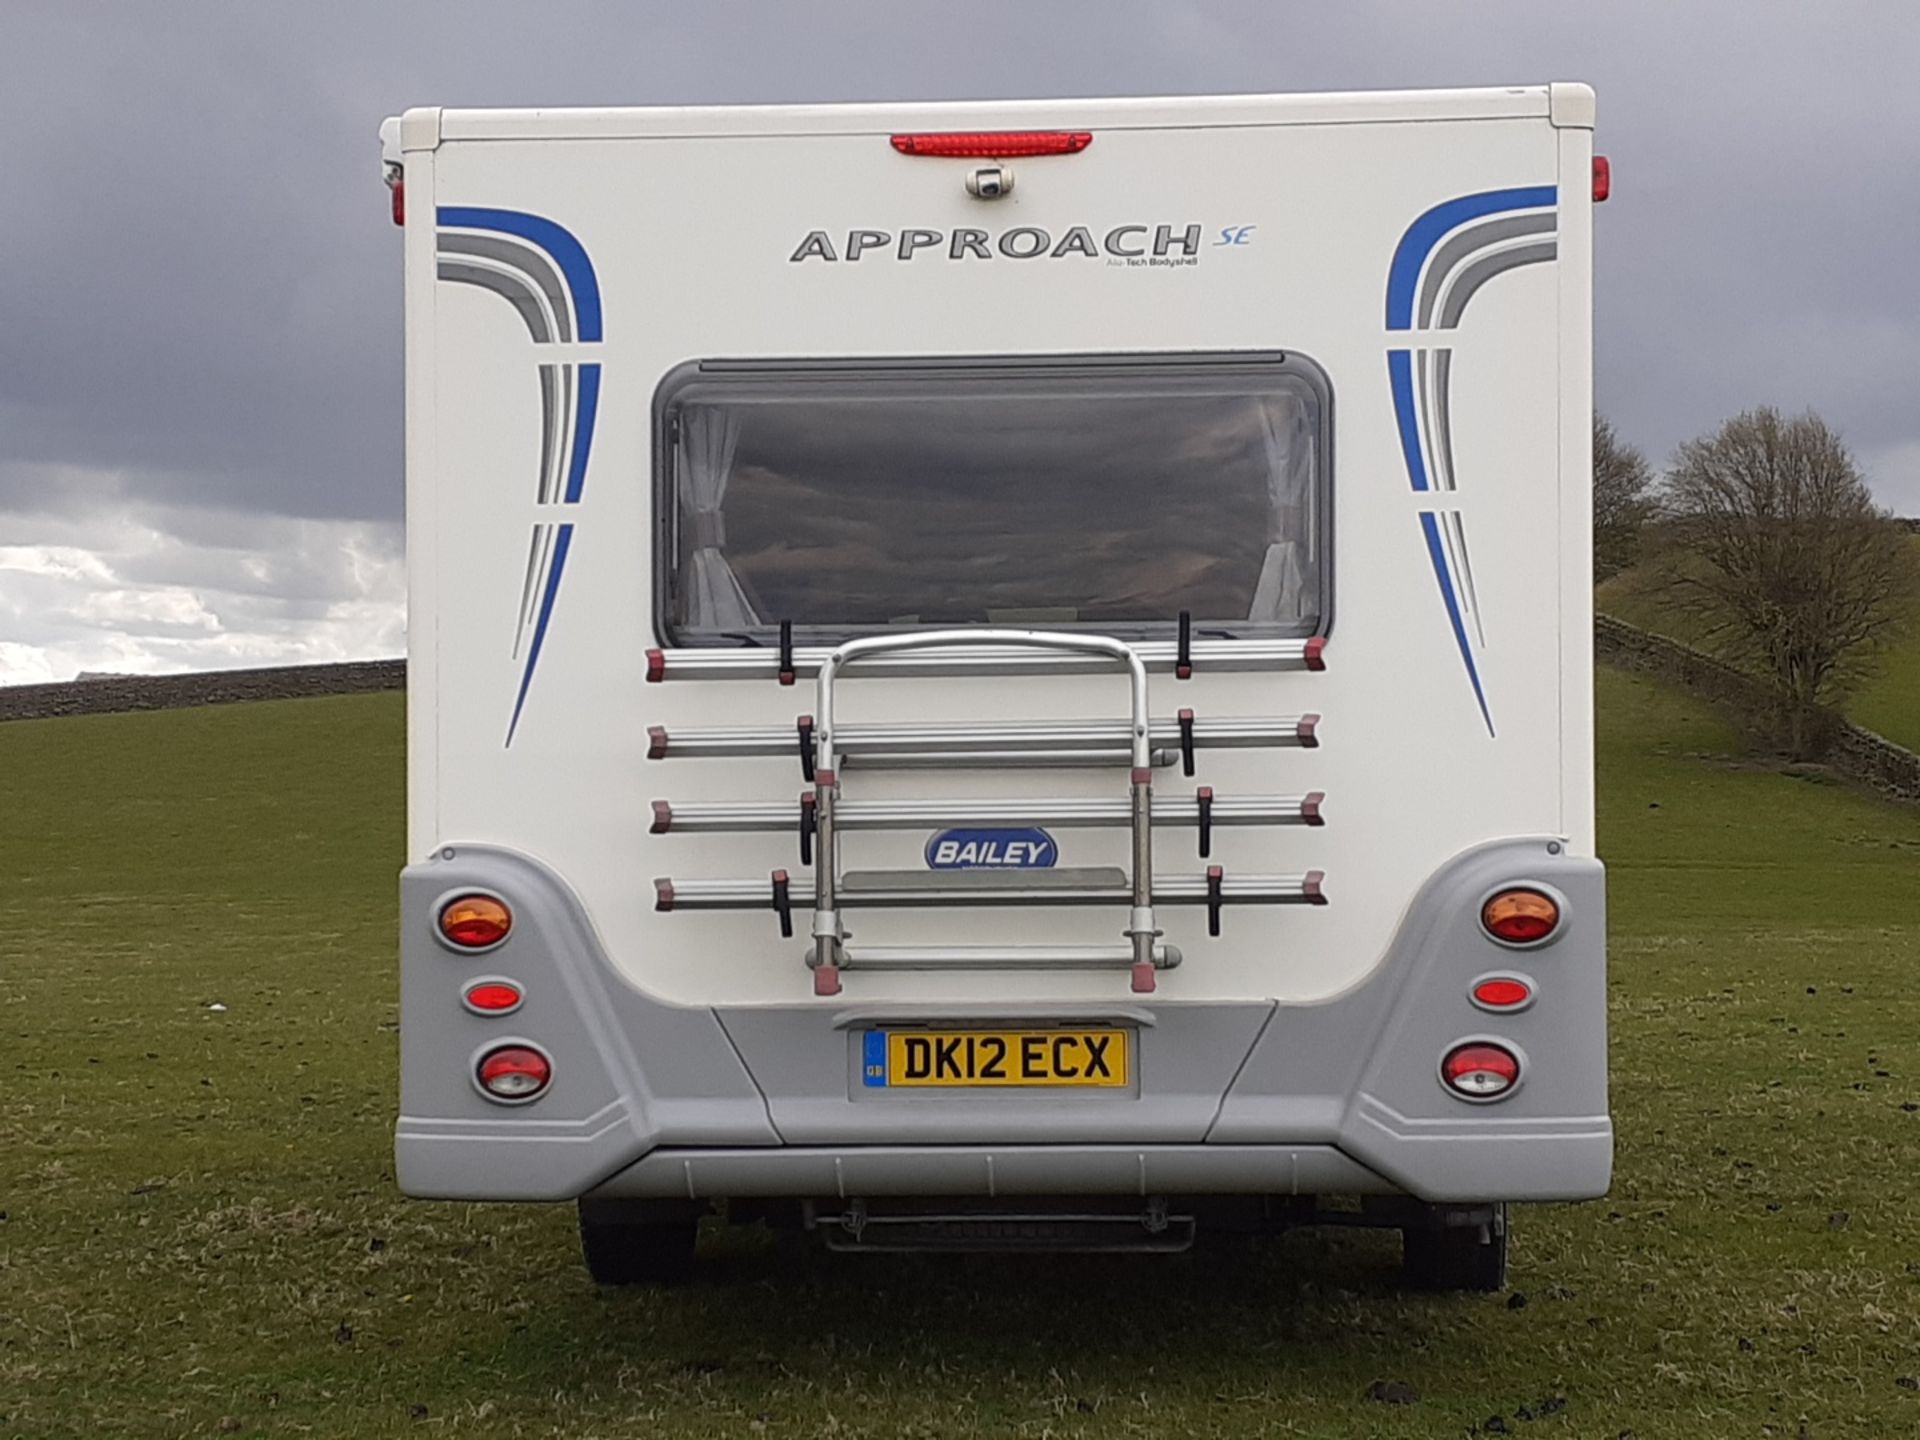 2012 BAILEY APPROACH 760 SE LUXURY 6 BERTH MOTORHOME £10K OF EXTRAS, 30,000 MILES FROM NEW - Image 8 of 31